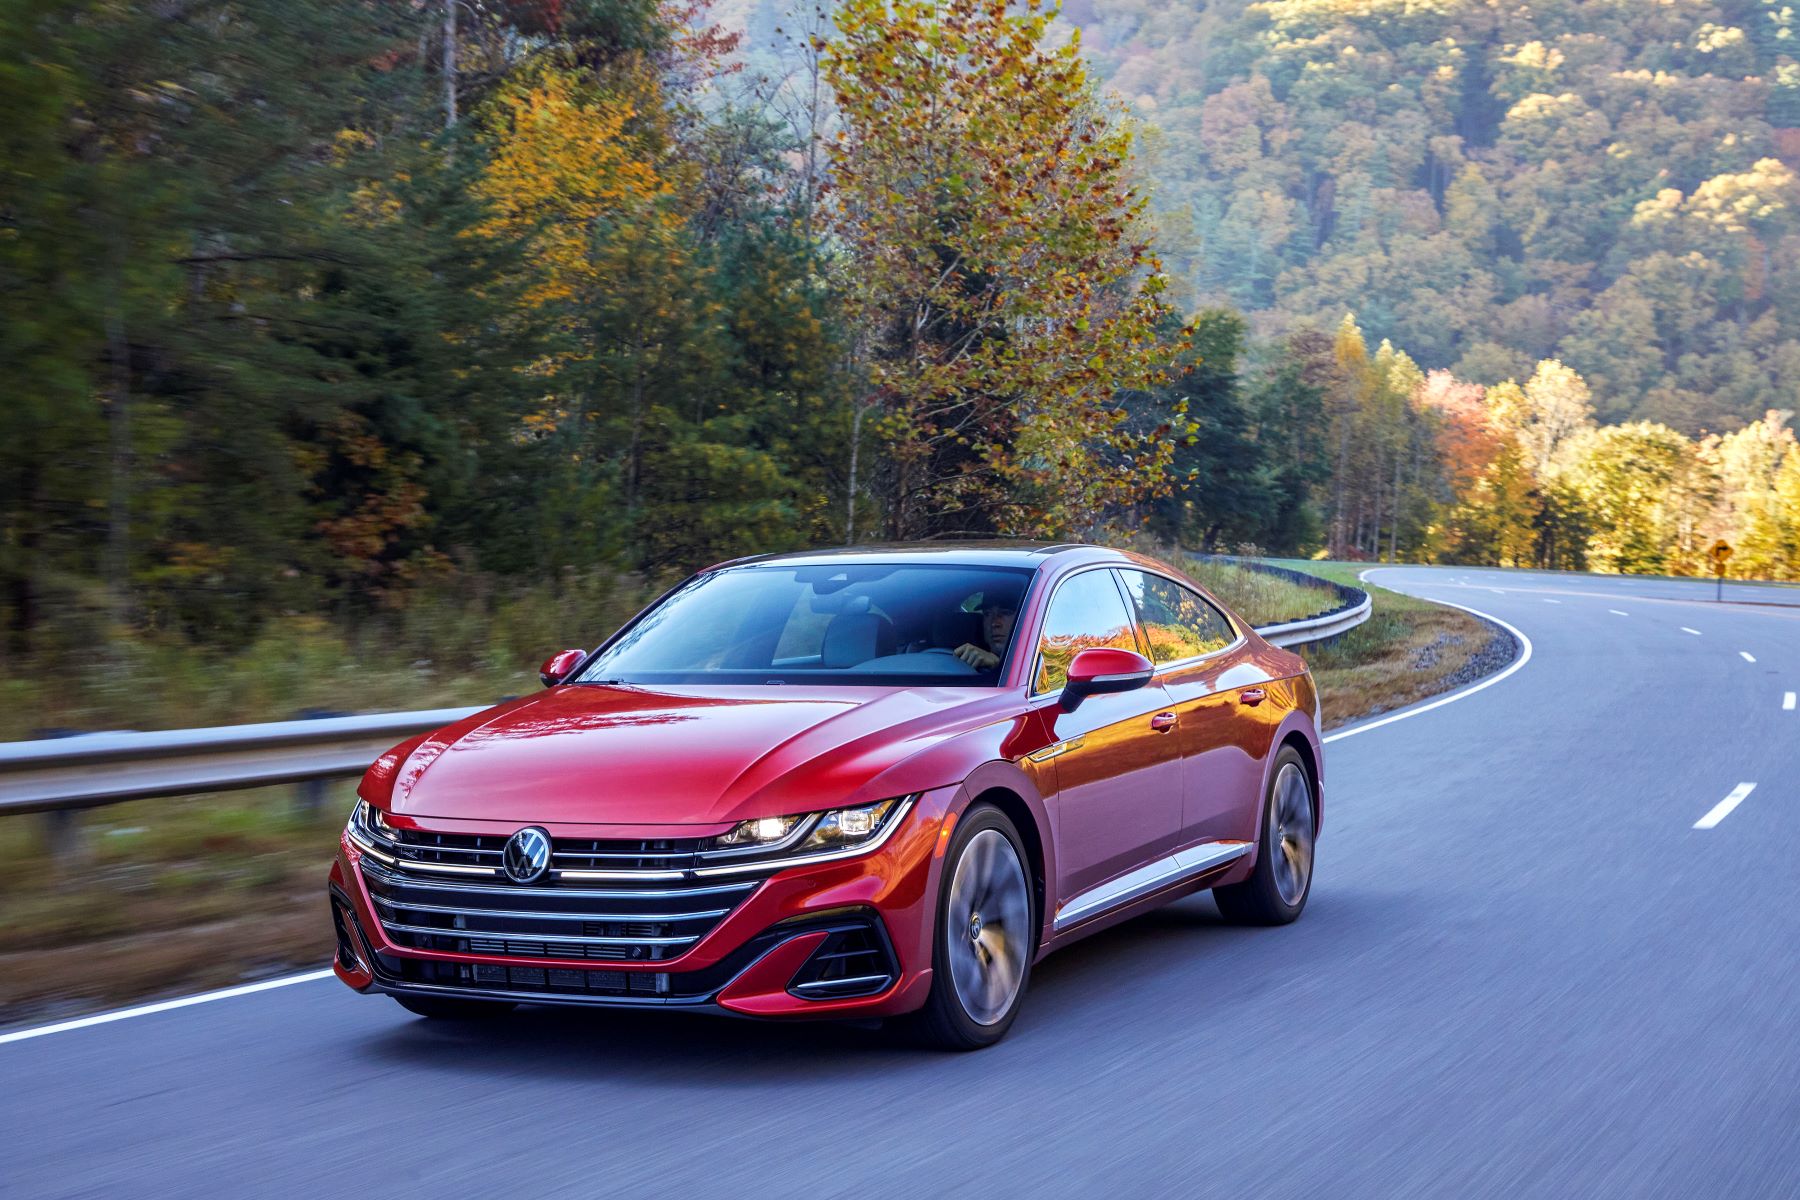 2021 Volkswagen Arteon compact executive liftback shooting brake sports sedan in red driving on a forest highway